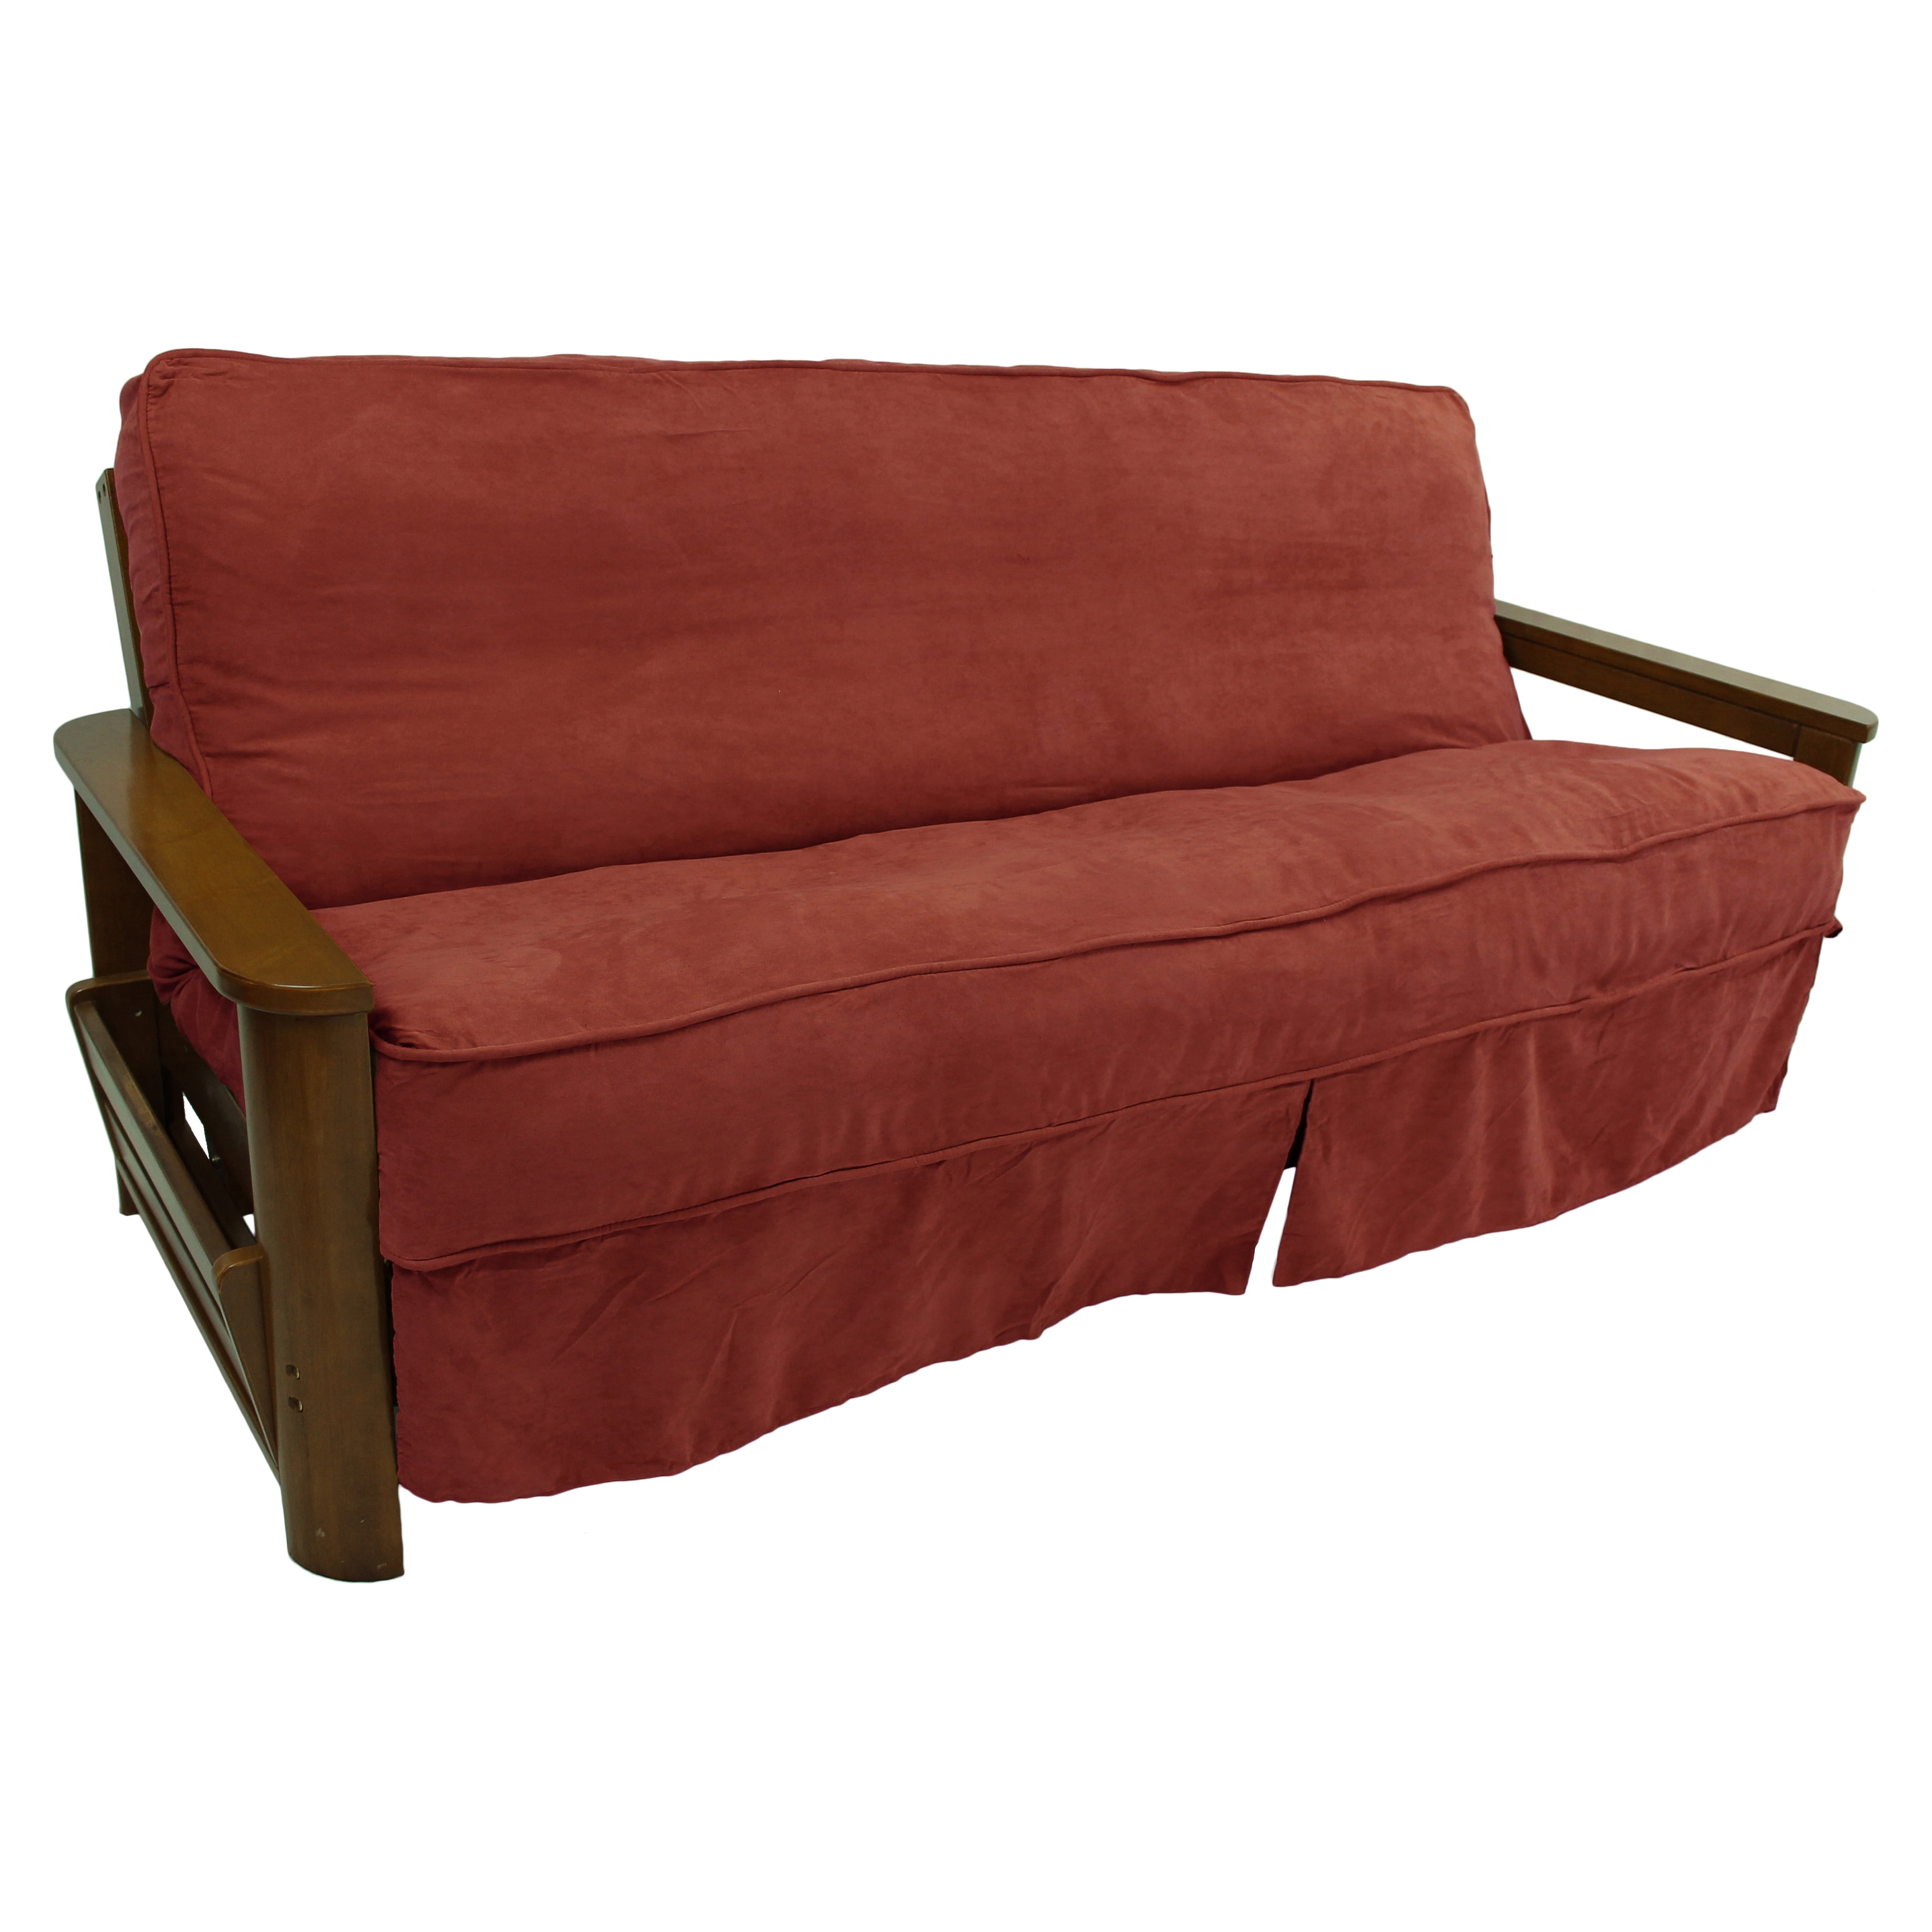 Picture of Blazing Needles 9670-CD-MS-RW 8 to 9 in. Solid Microsuede Double Corded Full Futon Slipcover, Red Wine